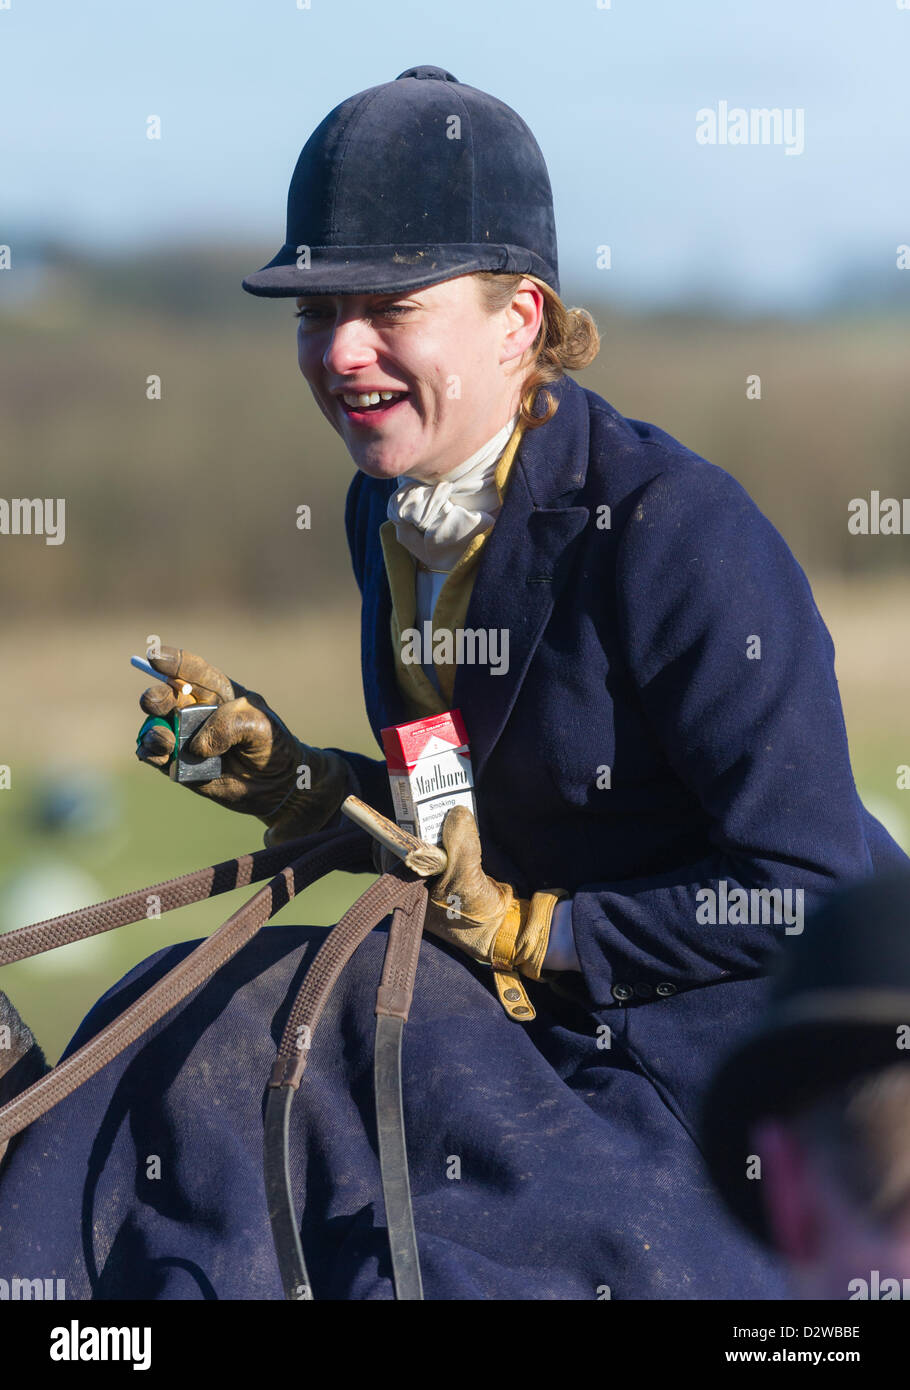 Ingarsby, Leicestershire, UK. Saturday 2nd Feb 2013. Lady Martha Sitwell after the finish of the inaugural running of the Bernard Weatherill Sidesaddle Chase, the first race for sidesaddle riders since 1921. Stock Photo